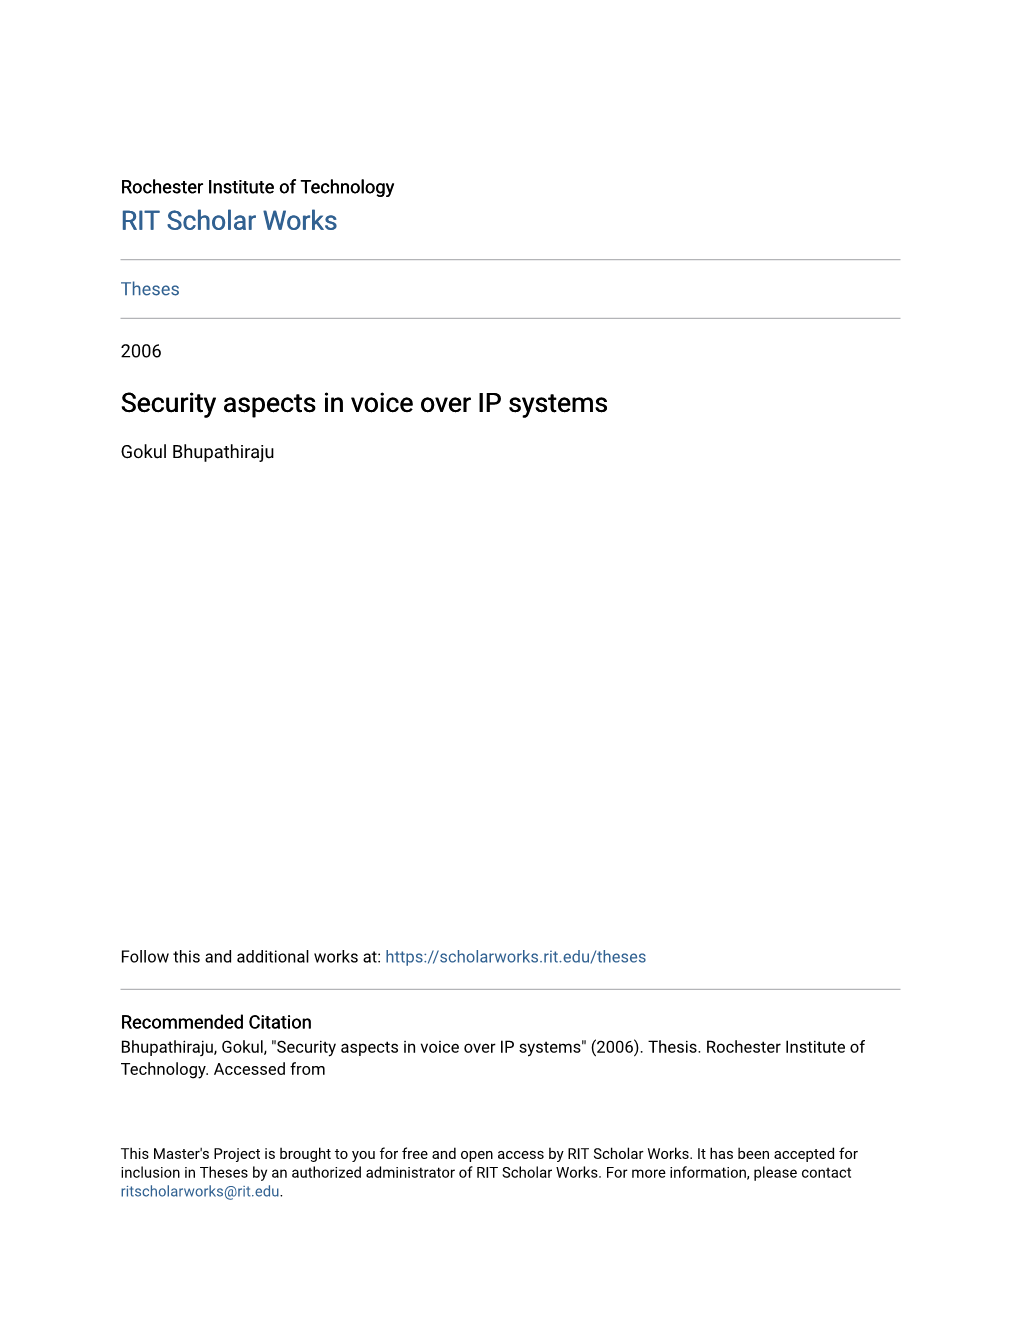 Security Aspects in Voice Over IP Systems